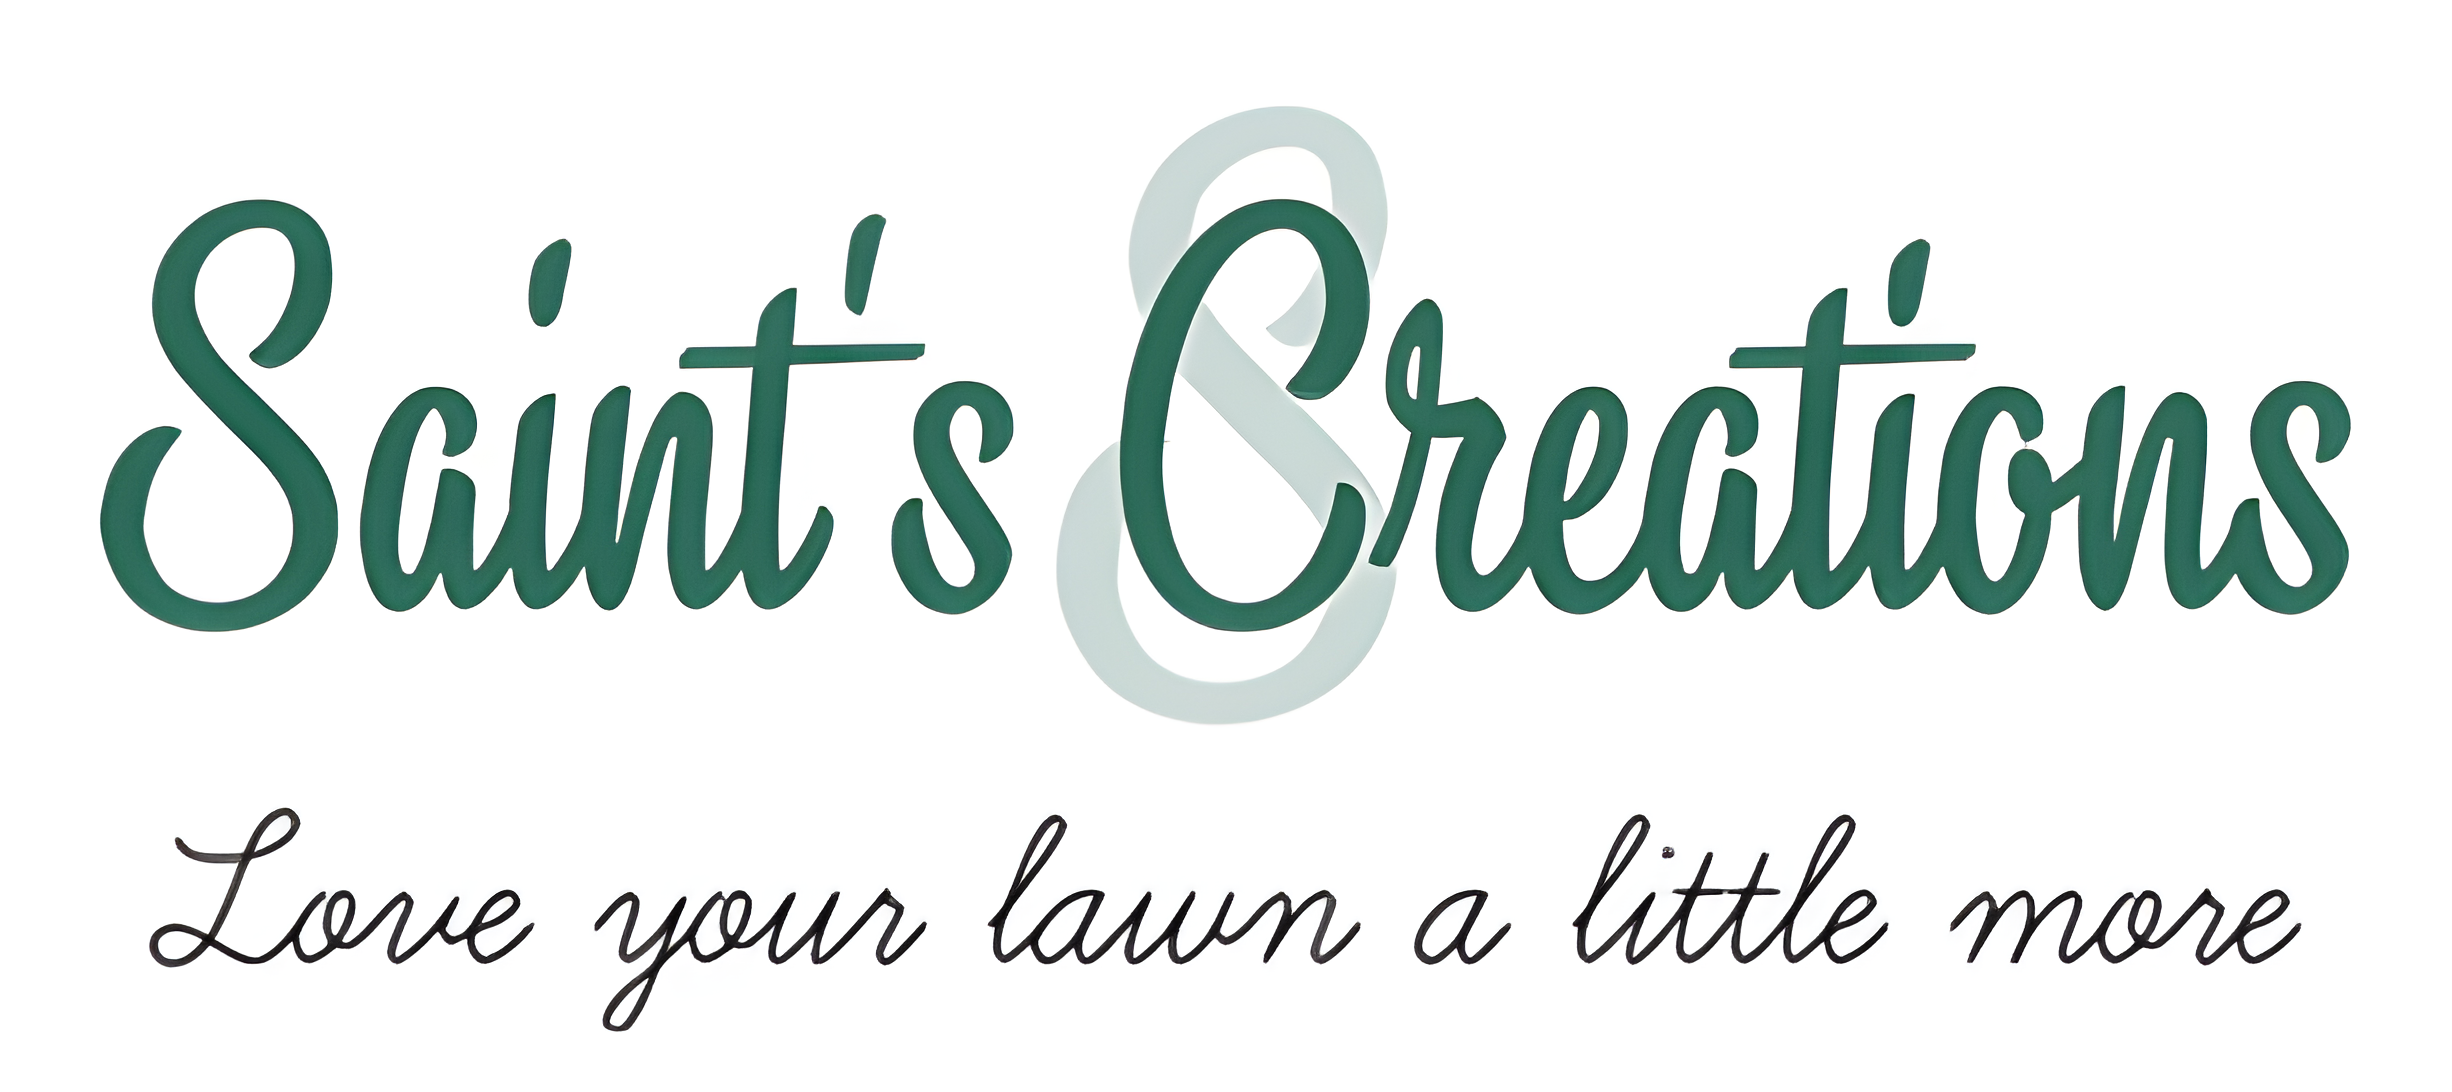 Saint's Creations Lawn Care & Small Engines